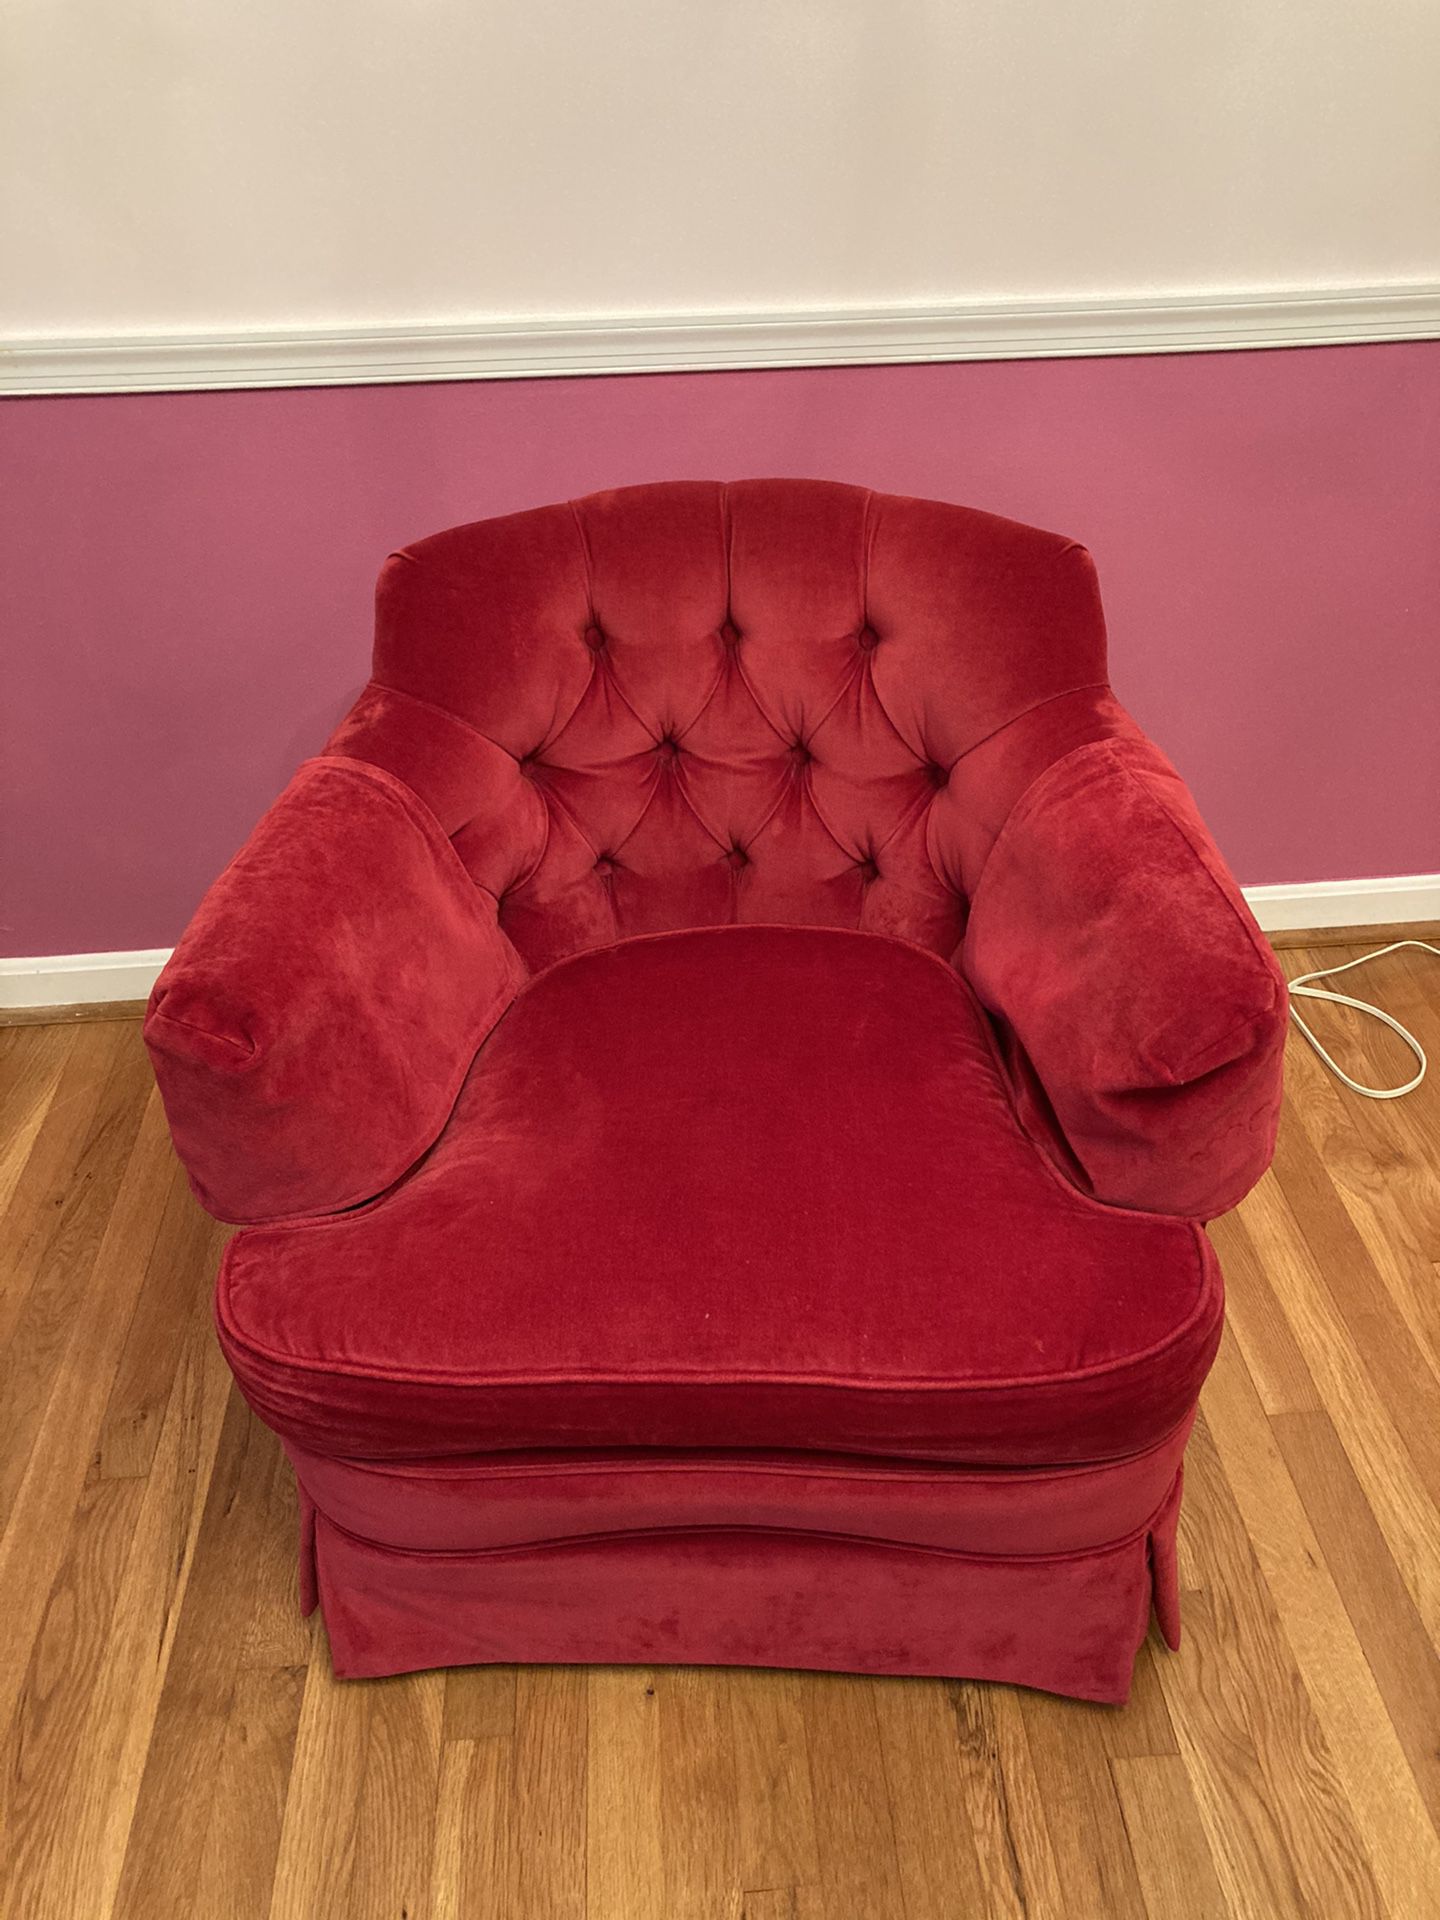 Soft red suede sofa seat